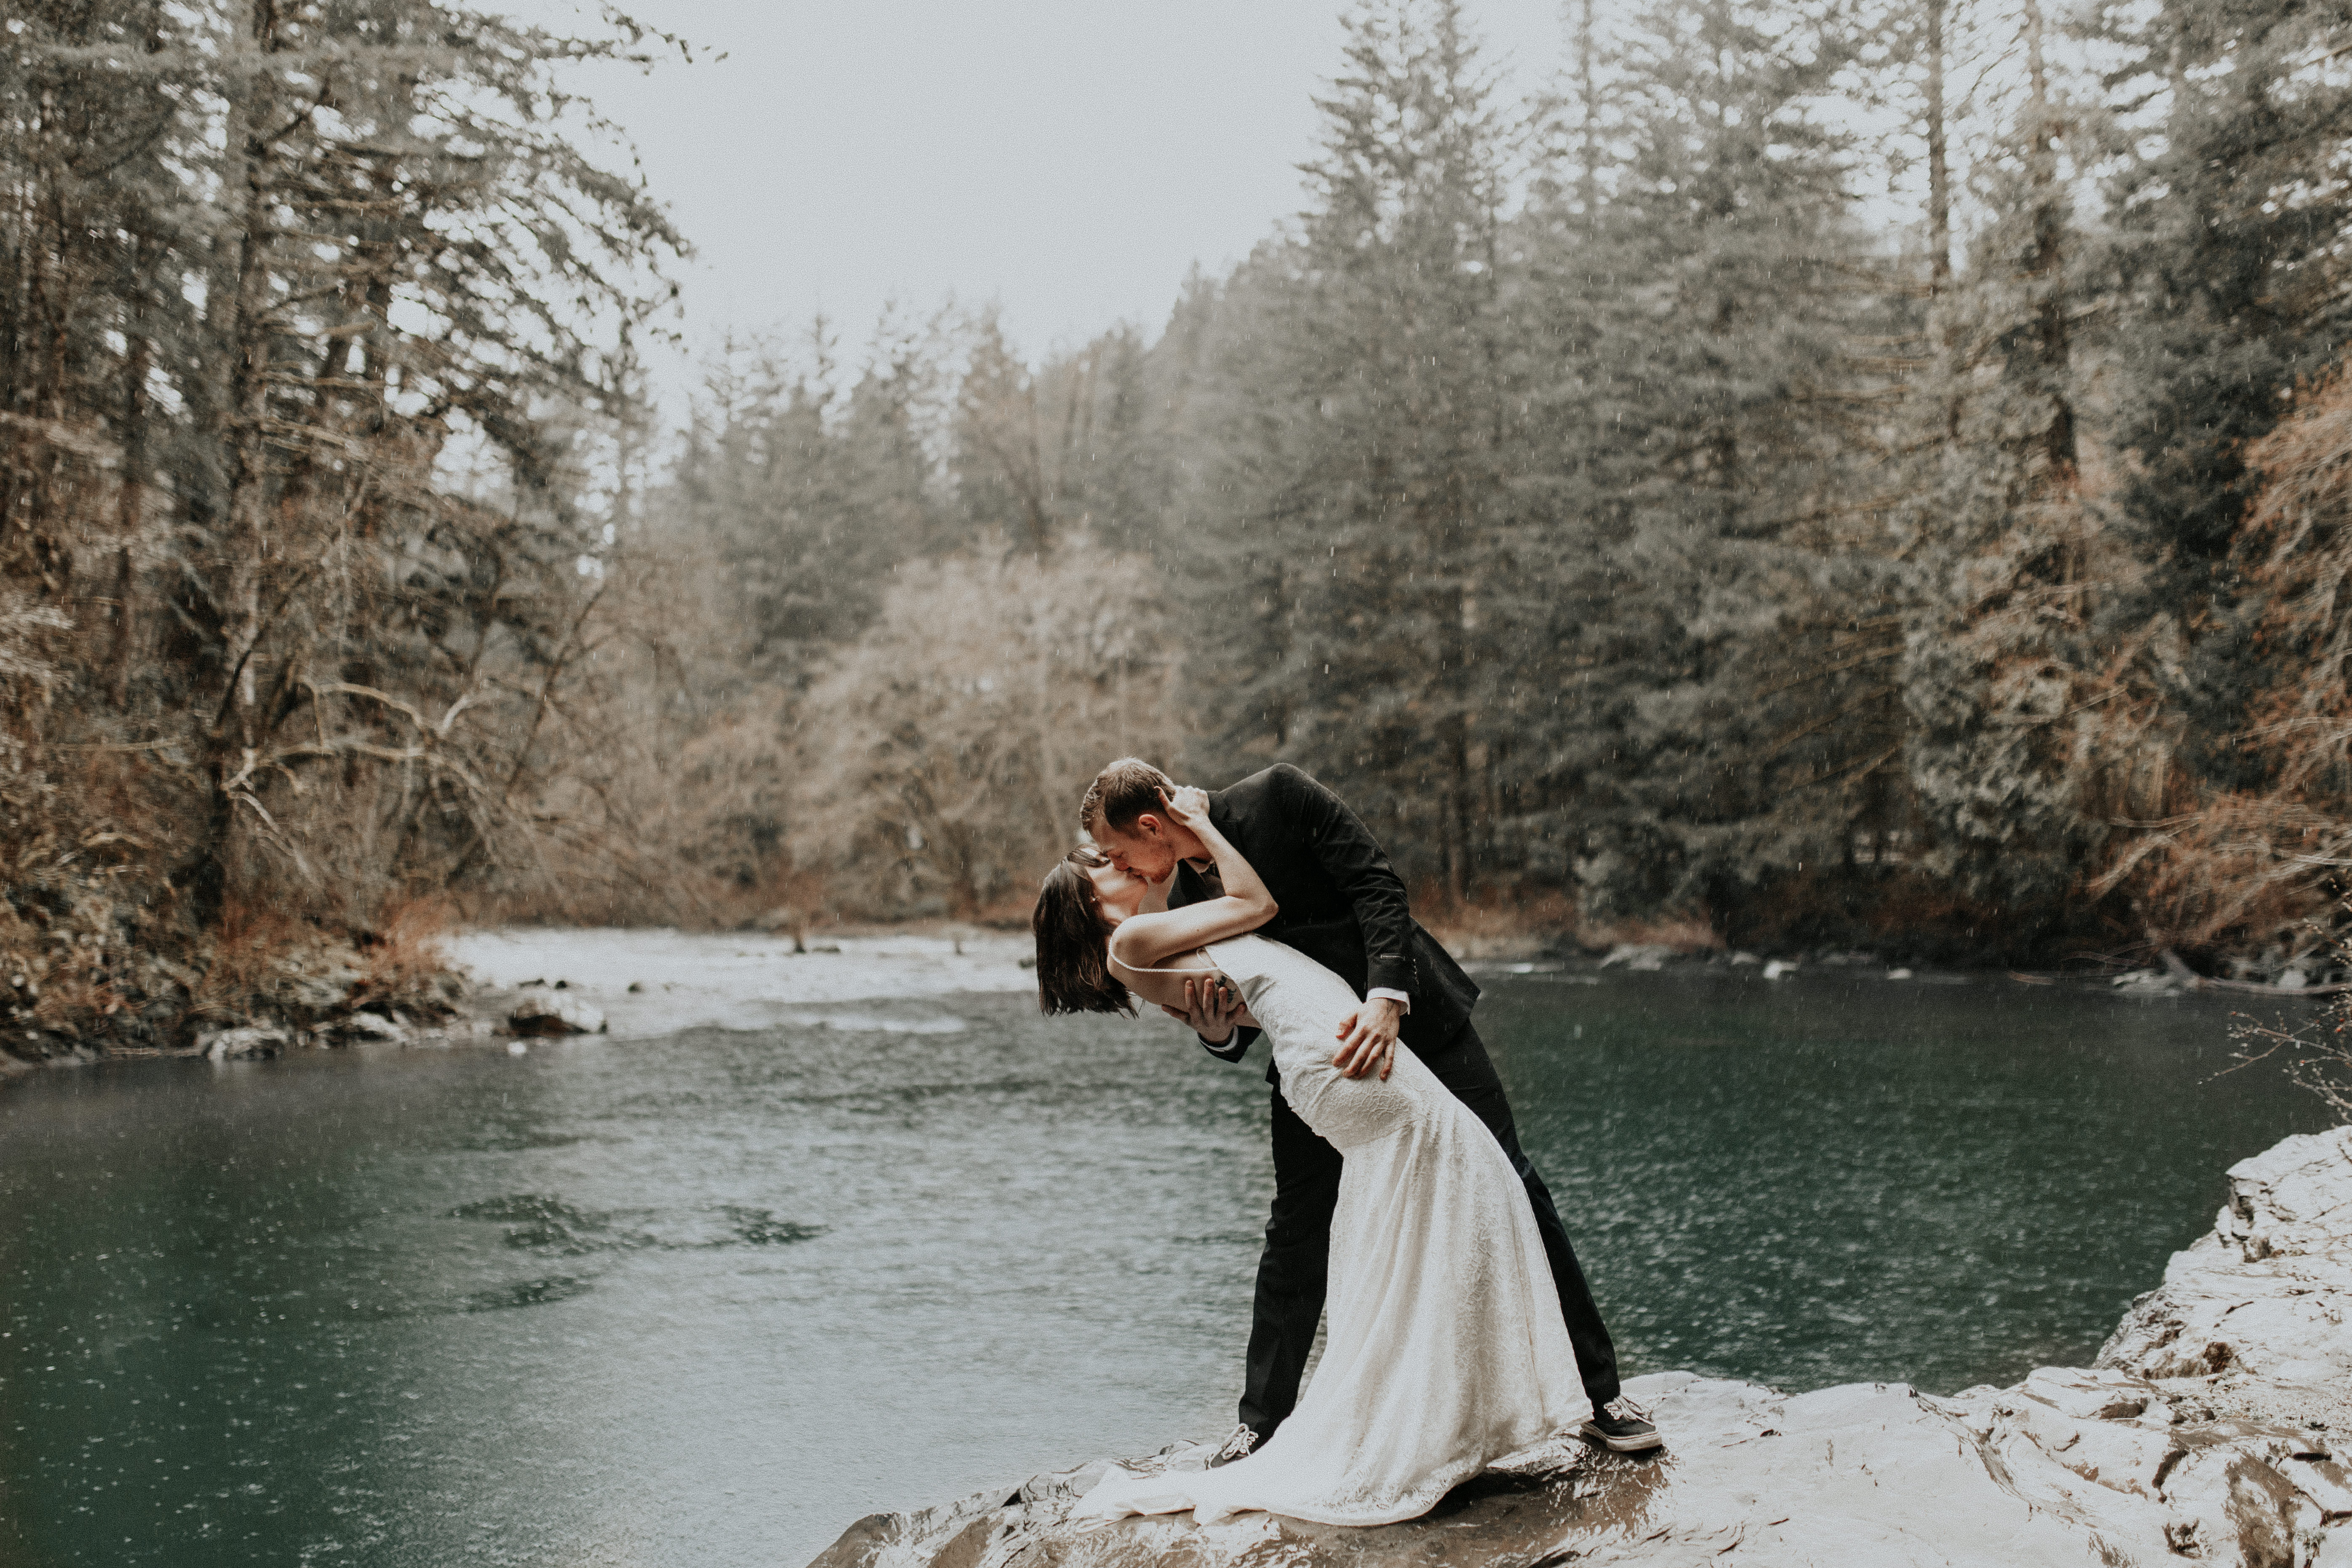 TJ dips Paige along the riverside of Moulton Falls during their elopement wedding in Washington.